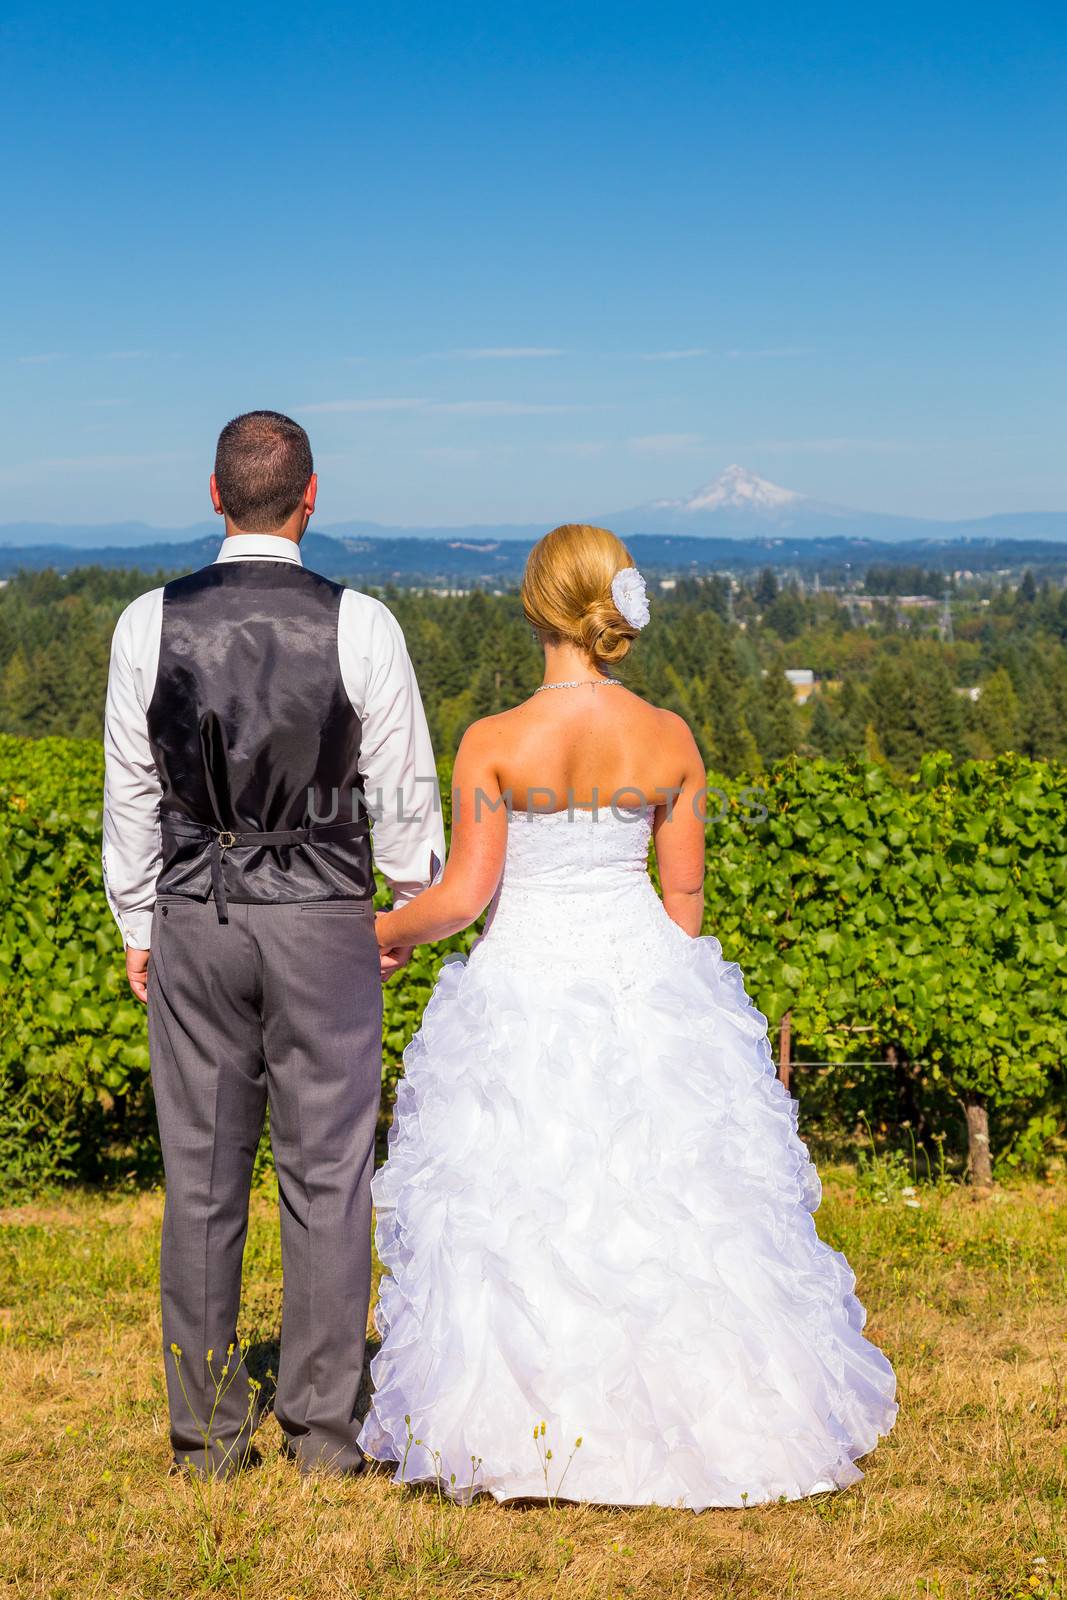 A bride and groom enjoy a view of mount hood in the background from this high elevation winery vineyard in Oregon just outside of Portland.